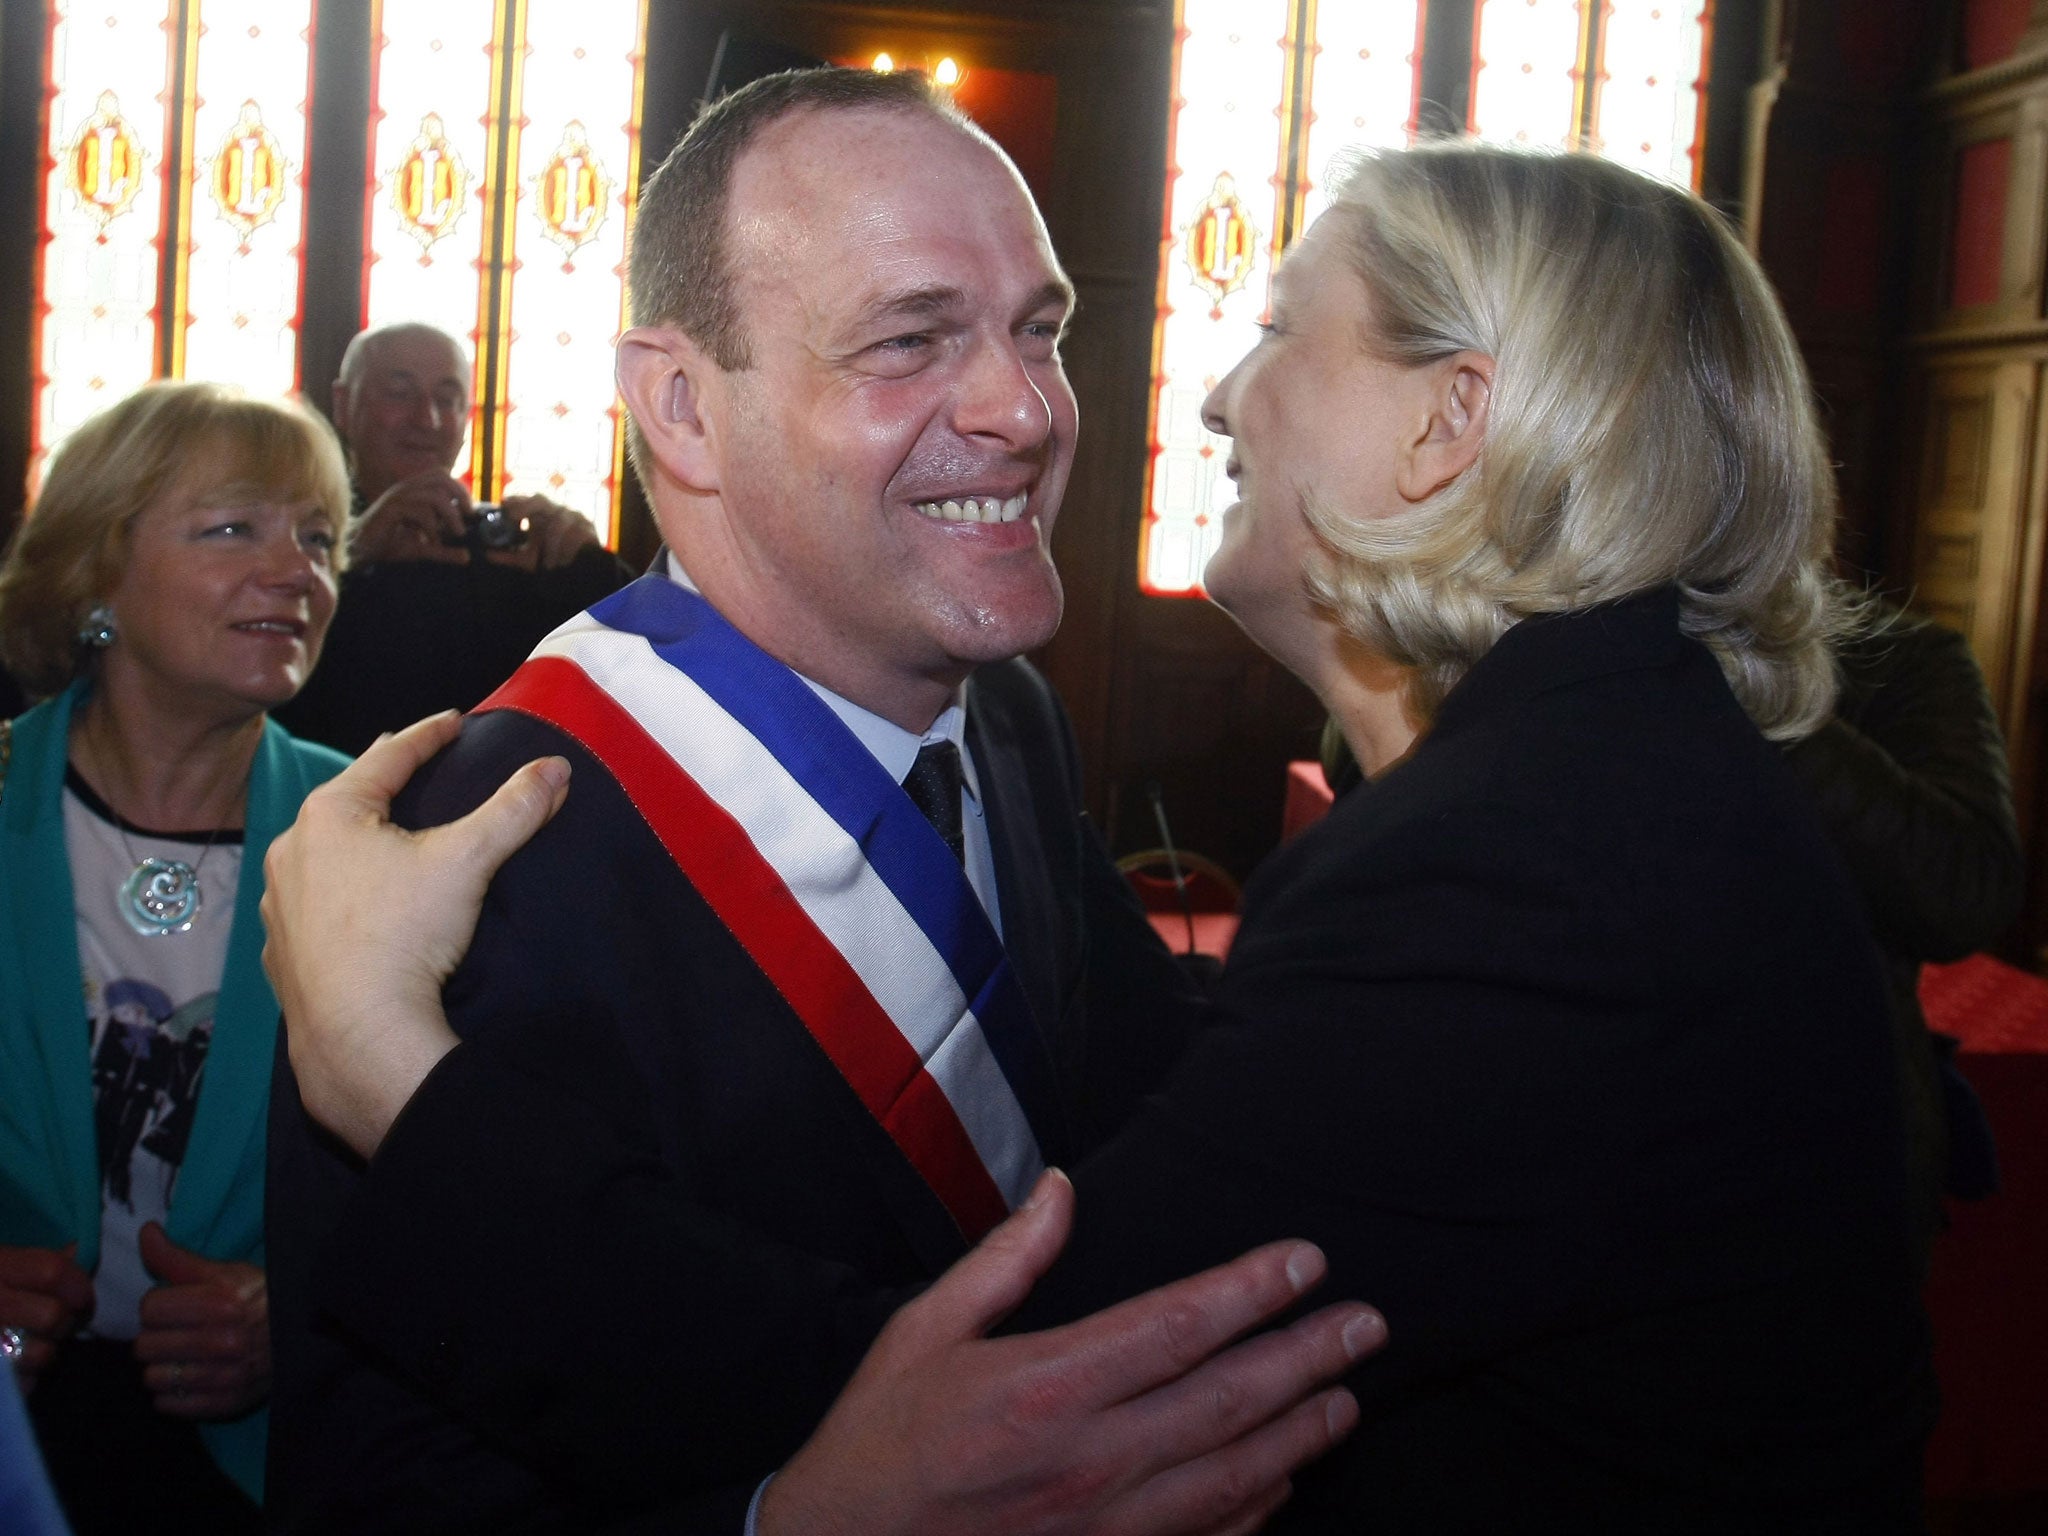 Marine Le Pen, right, the leader of the far-right National Front, congratulates Steeve Briois after he was elected mayor of the northern former mining town of Henin Beaumont